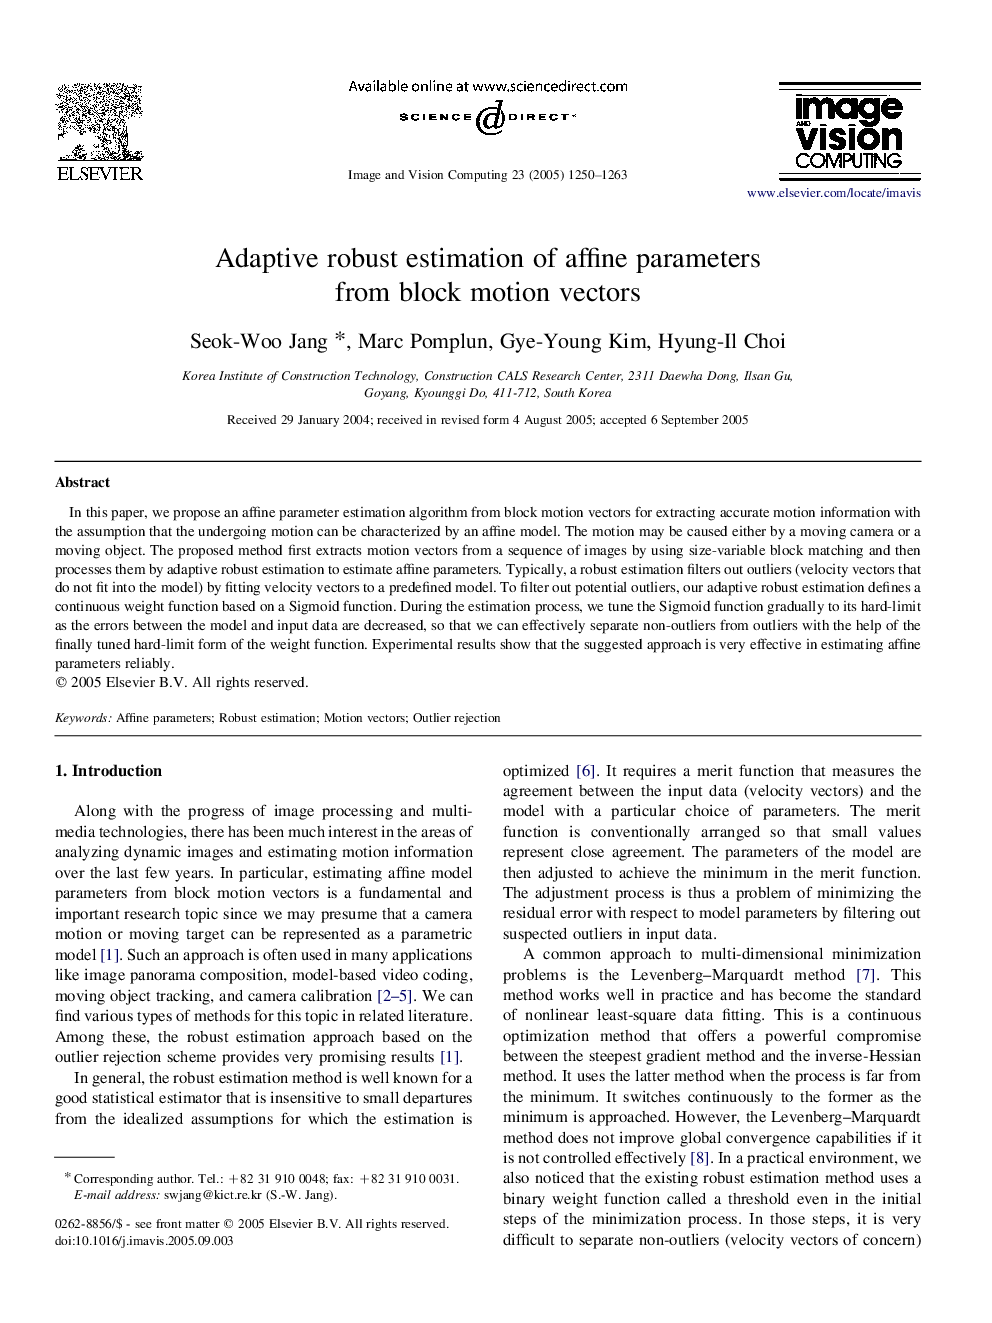 Adaptive robust estimation of affine parameters from block motion vectors